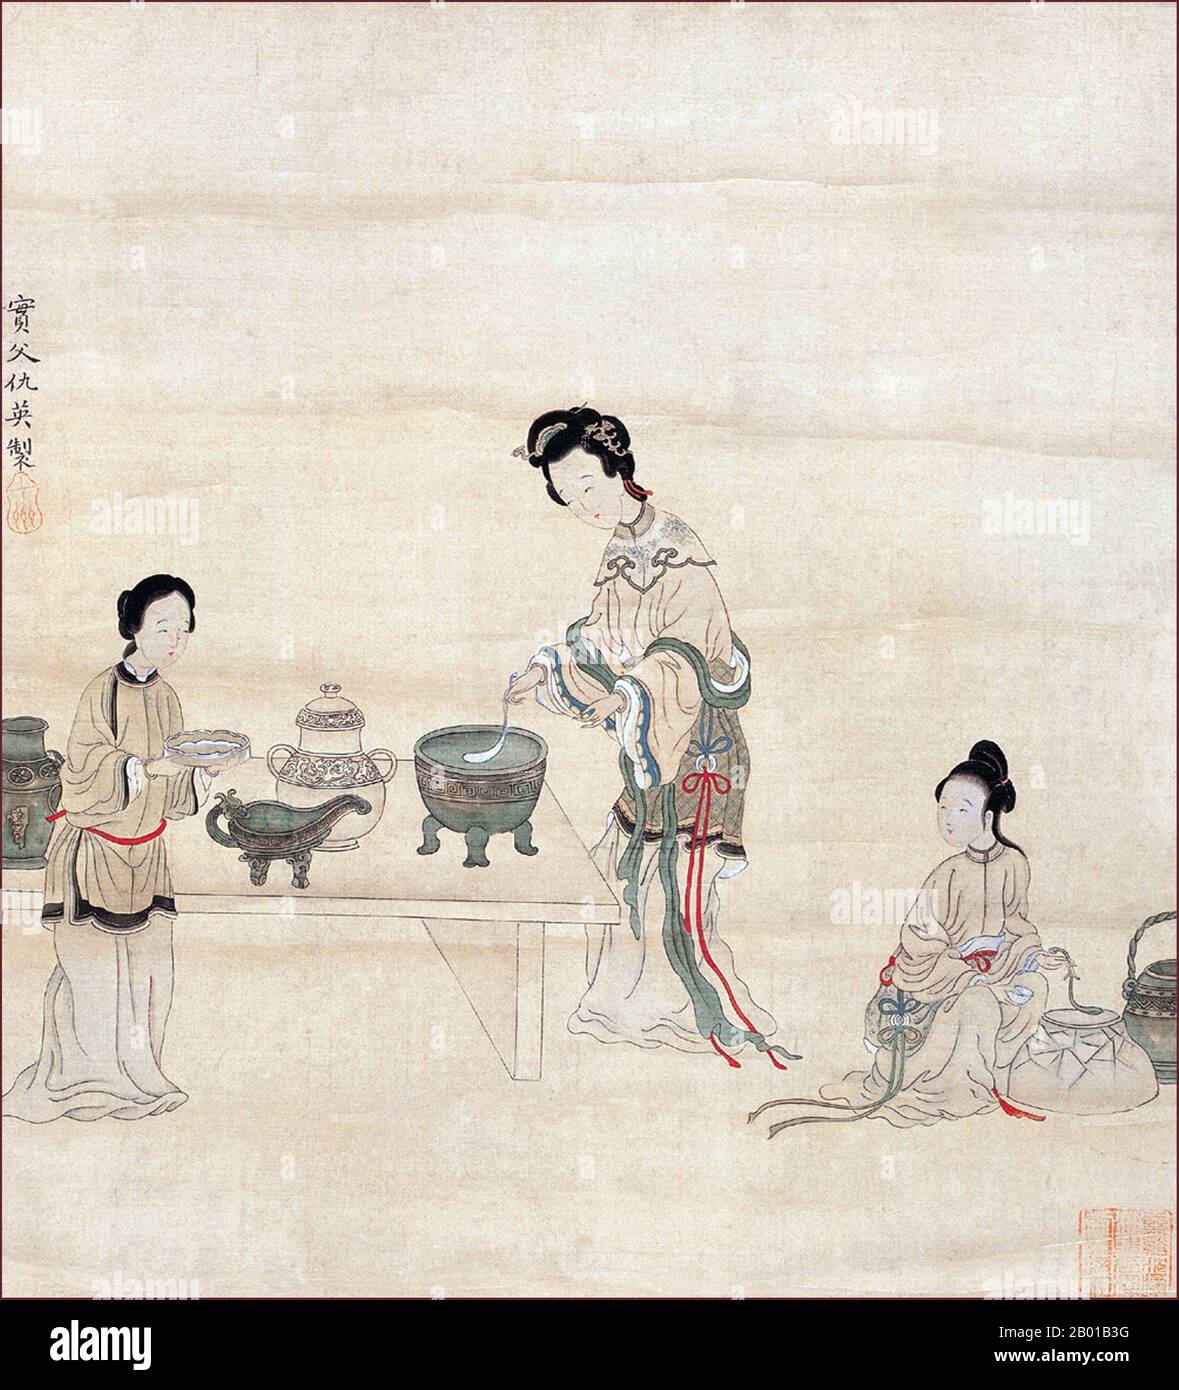 China: Wang Xifeng ('Splendid Phoenix') with two girls. Detail of handscroll painting of a scene from the Dream of the Red Chamber, mid-18th century.  Dream of the Red Chamber (pinyin: Hóng Lóu Mèng; Wade–Giles: Hung Lou Meng), composed by Cao Xueqin (4 April 1710 - 10 June 1765), is one of China's Four Great Classical Novels. It was composed sometime in the middle of the 18th century during the Qing Dynasty. It is a masterpiece of Chinese vernacular literature and is generally acknowledged to be the pinnacle of classical Chinese novels. Stock Photo